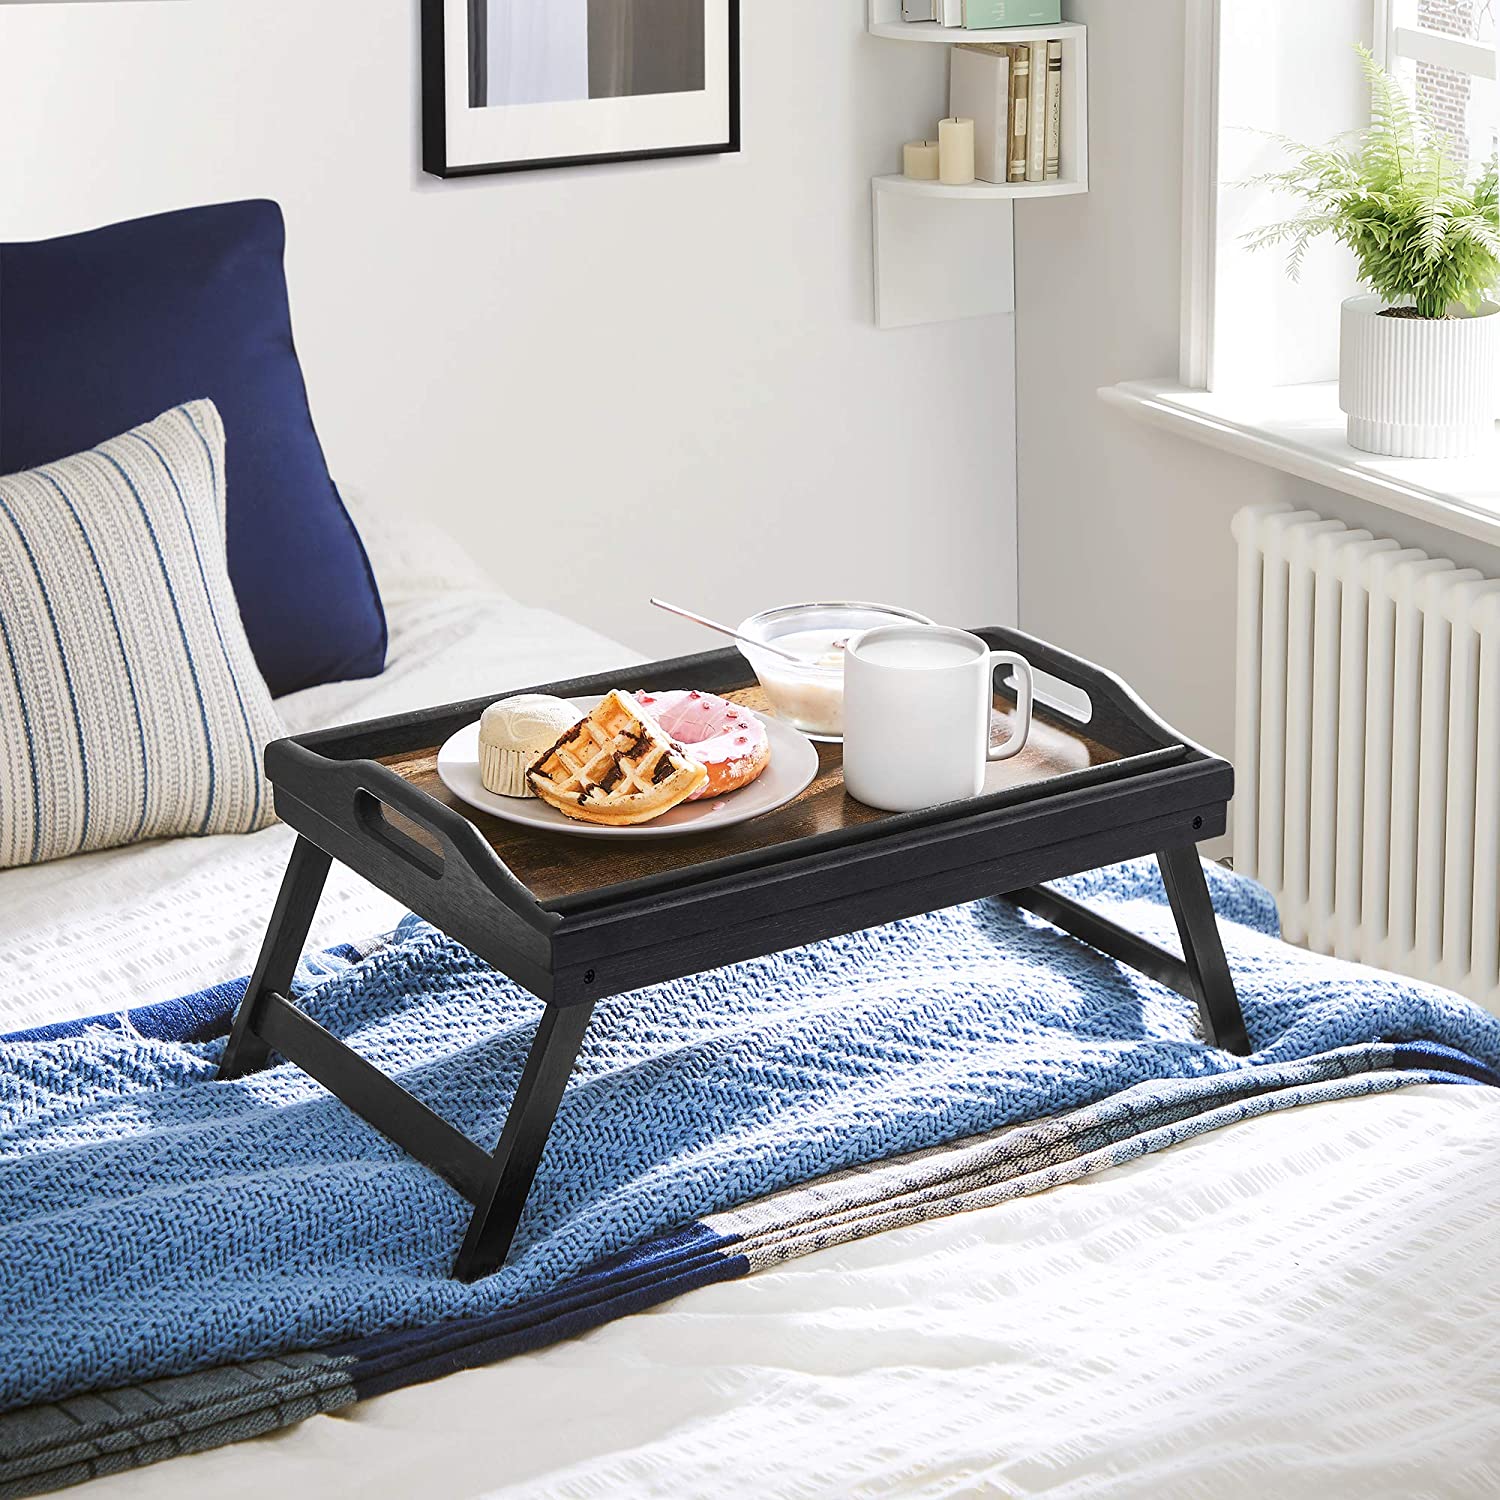 How to Make a Serving Tray with Collapsable Legs